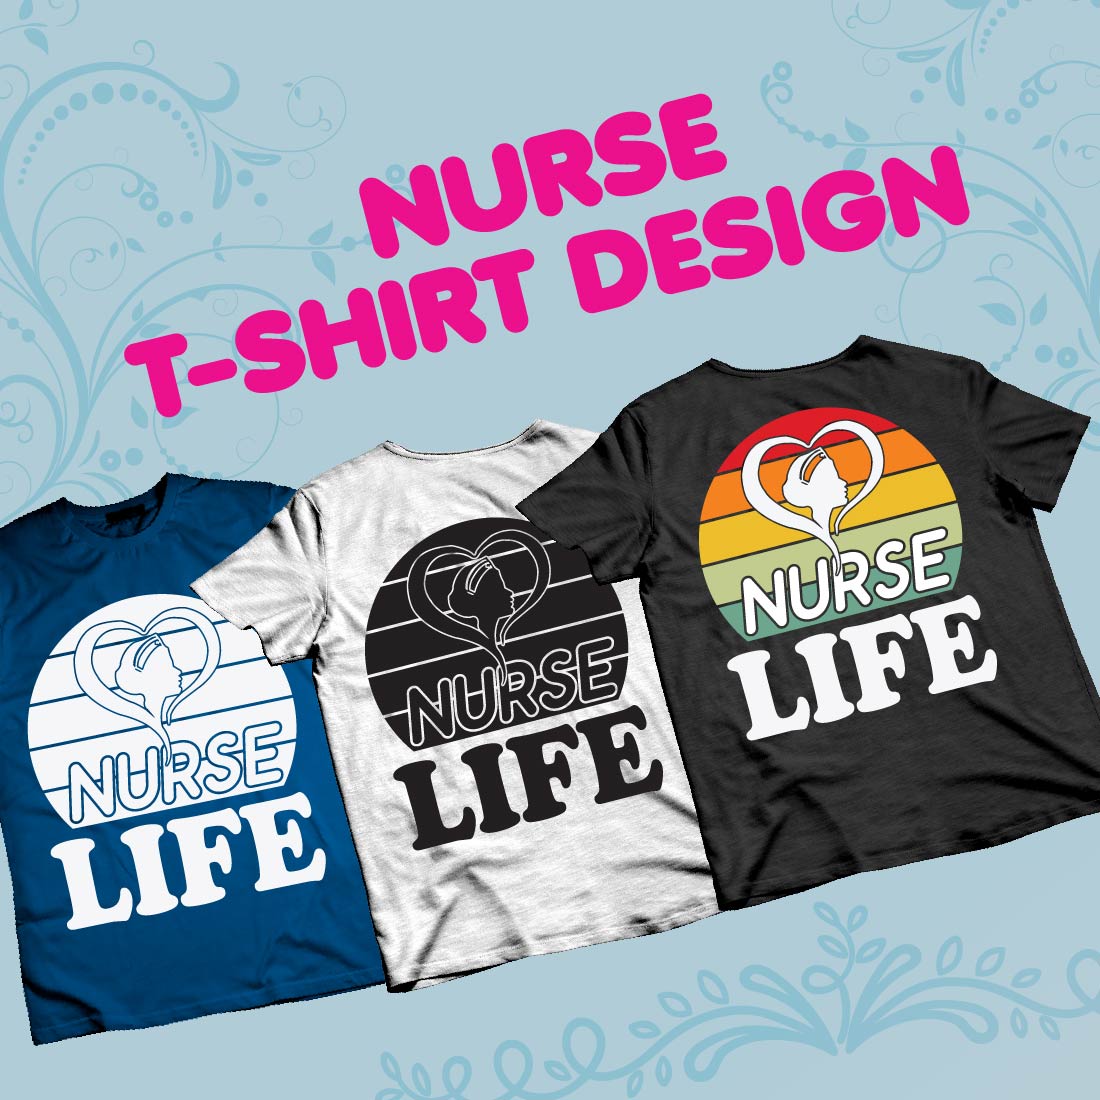 A collection of images of t-shirts with a wonderful print about nurses.